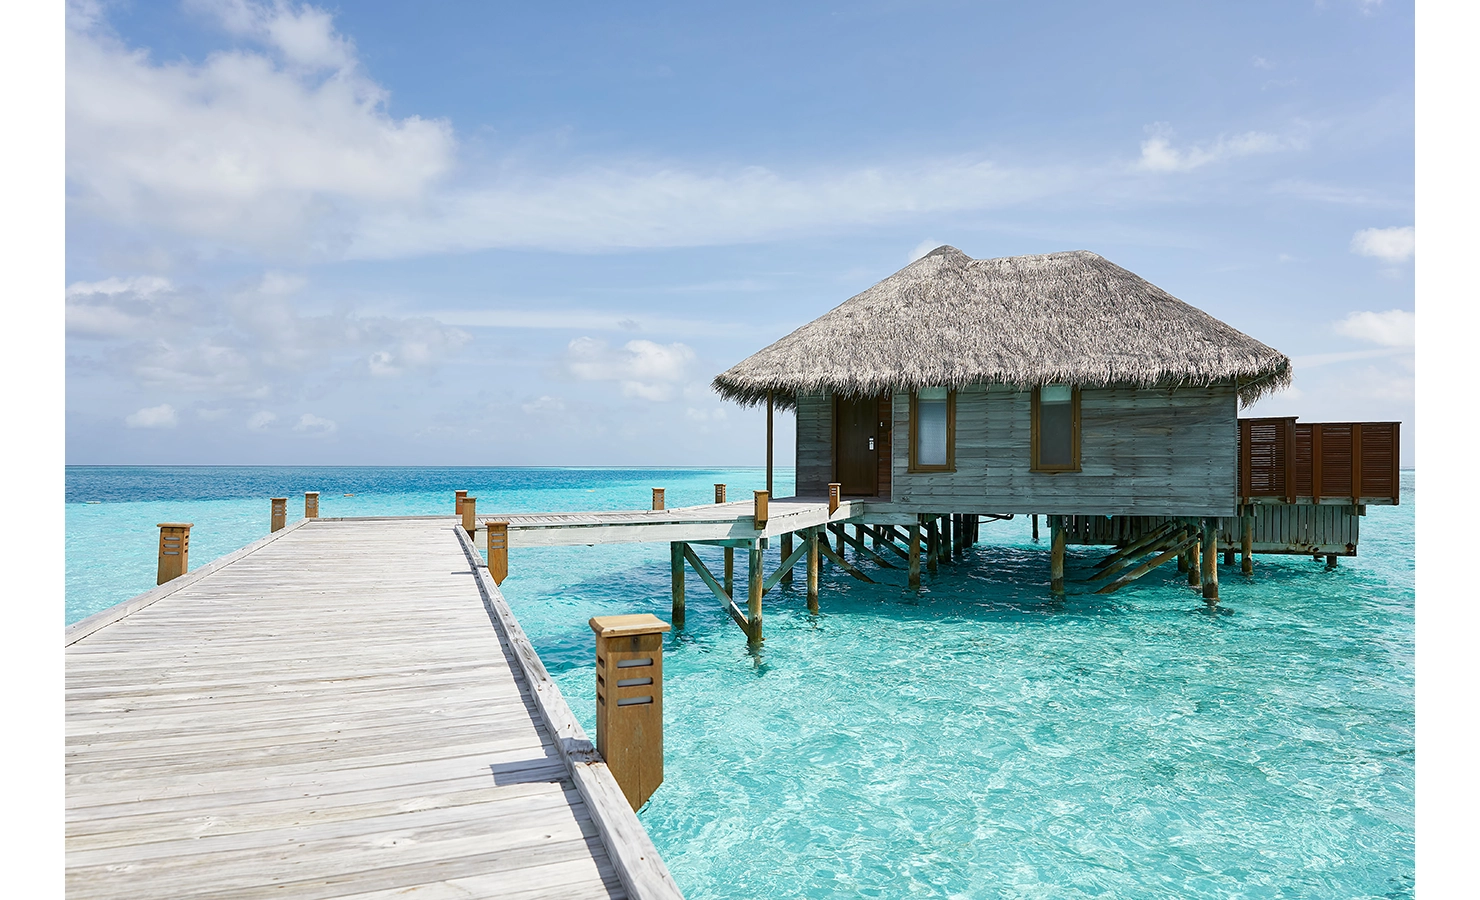 Perfect Hideaways, Conrad Maldives, Luxury accomodation cottage over the ocean